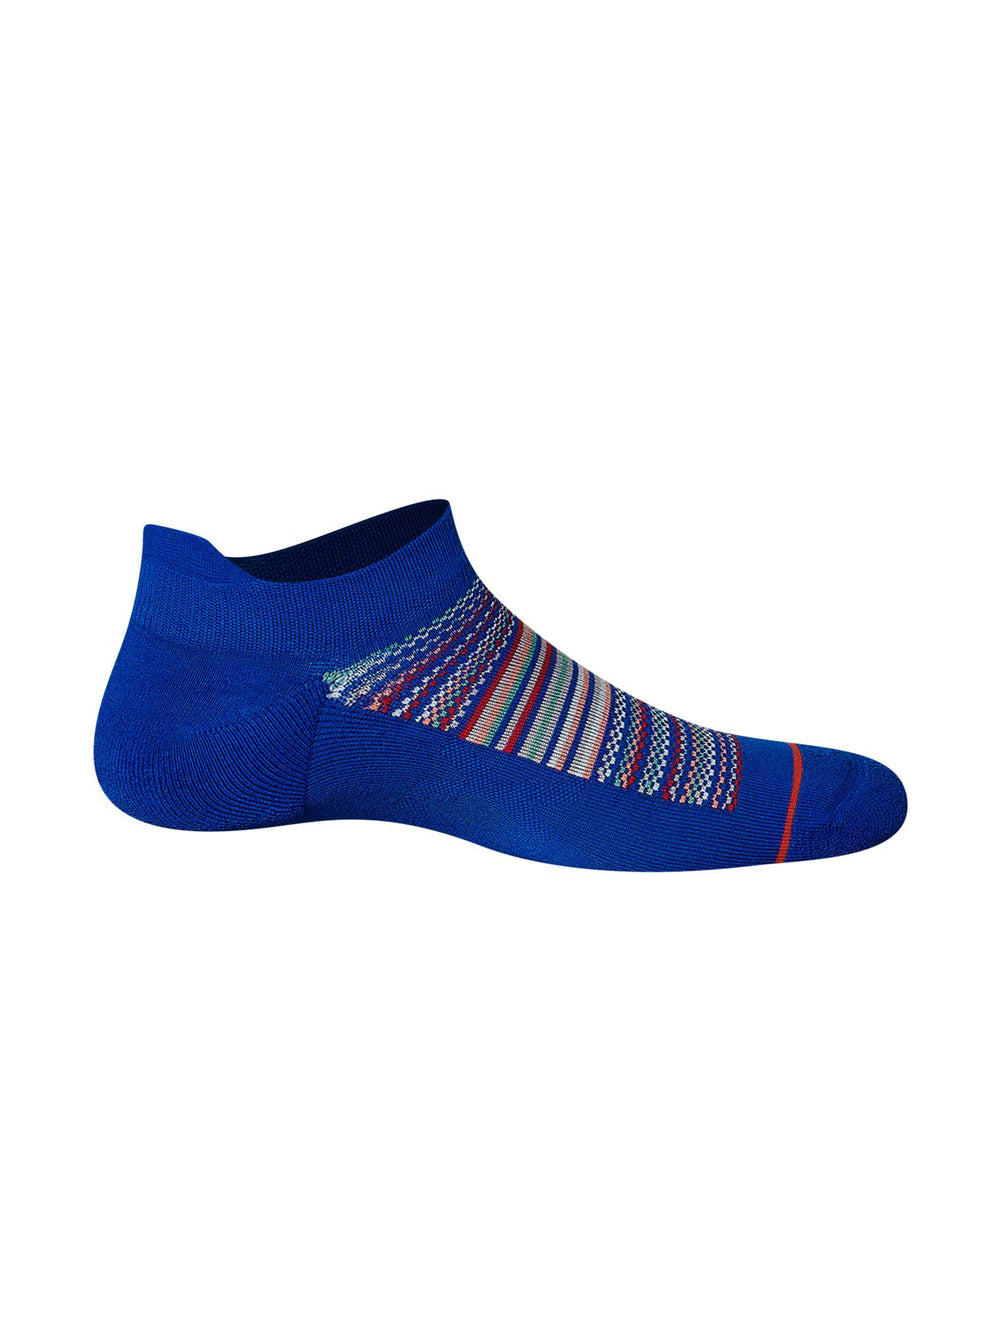 SAXX VIBRANT STRIPE LOW SHOW - CLEARANCE